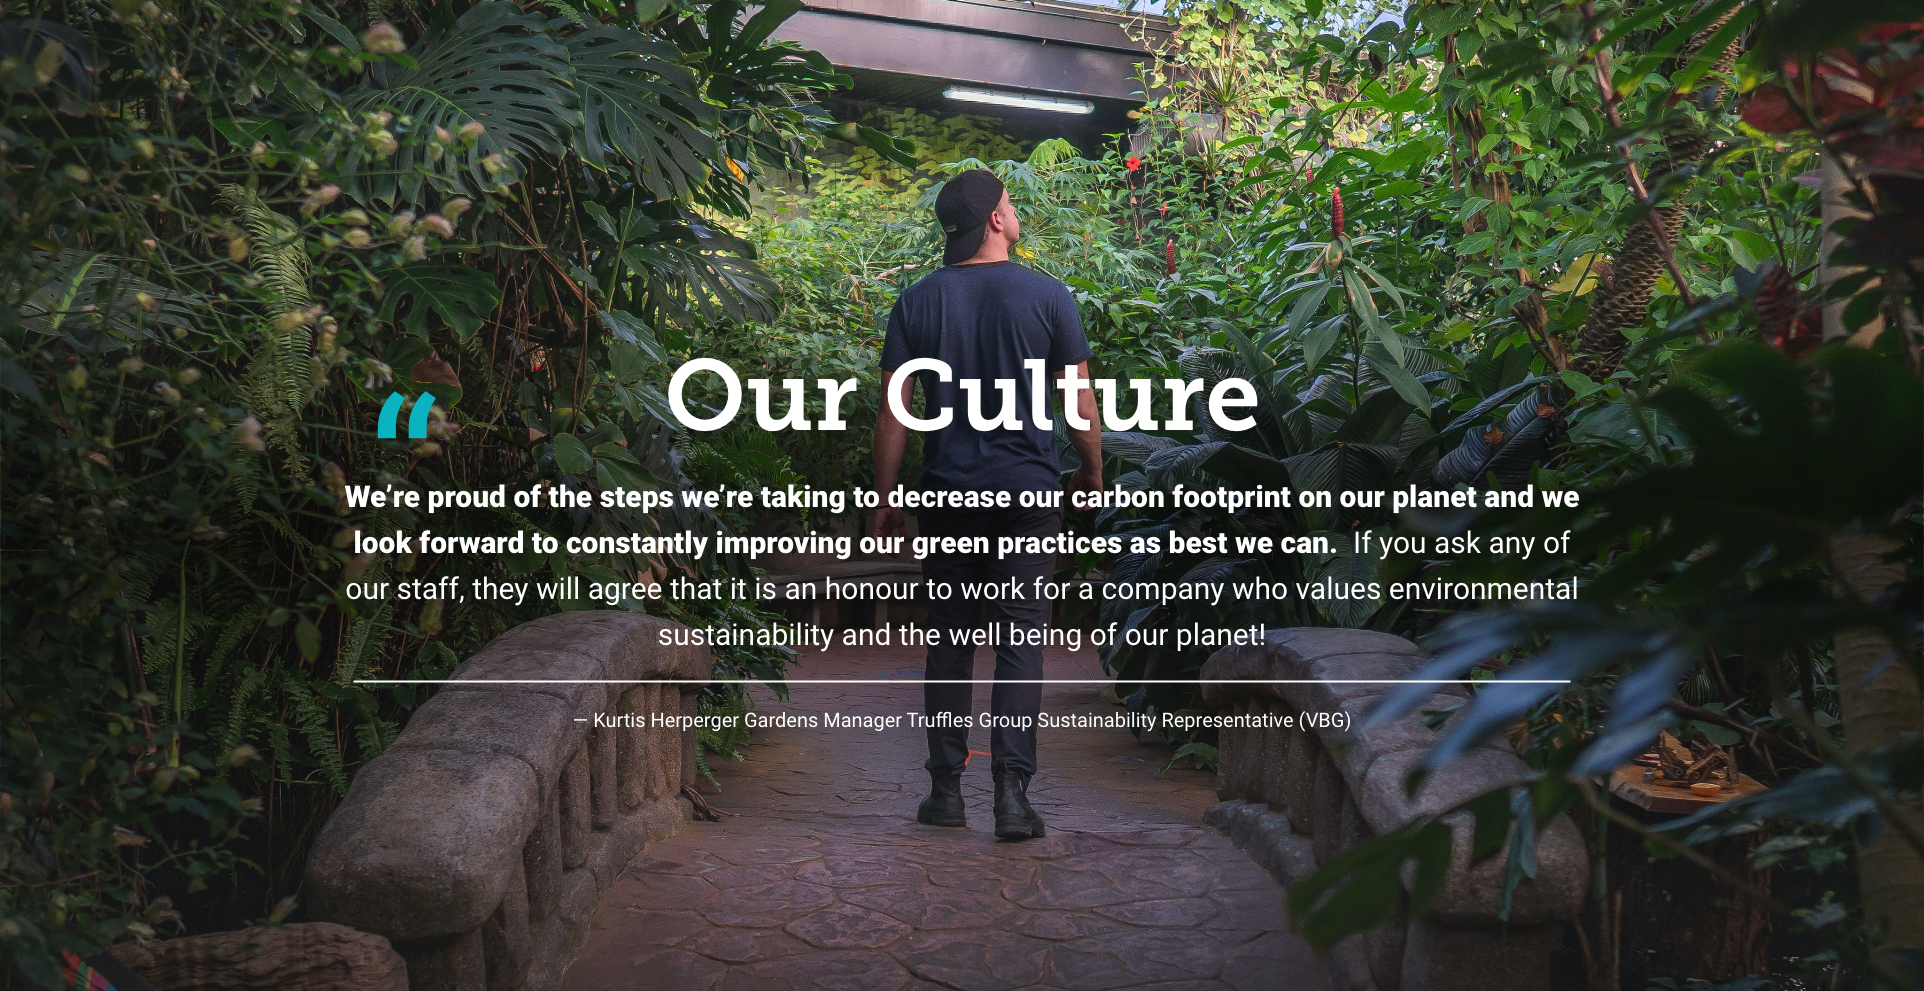 Image of a guest in the Victoria Butterfly Gardens with a quote from the Gardens Manager superimposed over it, "Our Culture. We're proud of the steps we're taking to decrease our carbon footprint on our planet and we look forward to constantly improving our green practices as best we can."